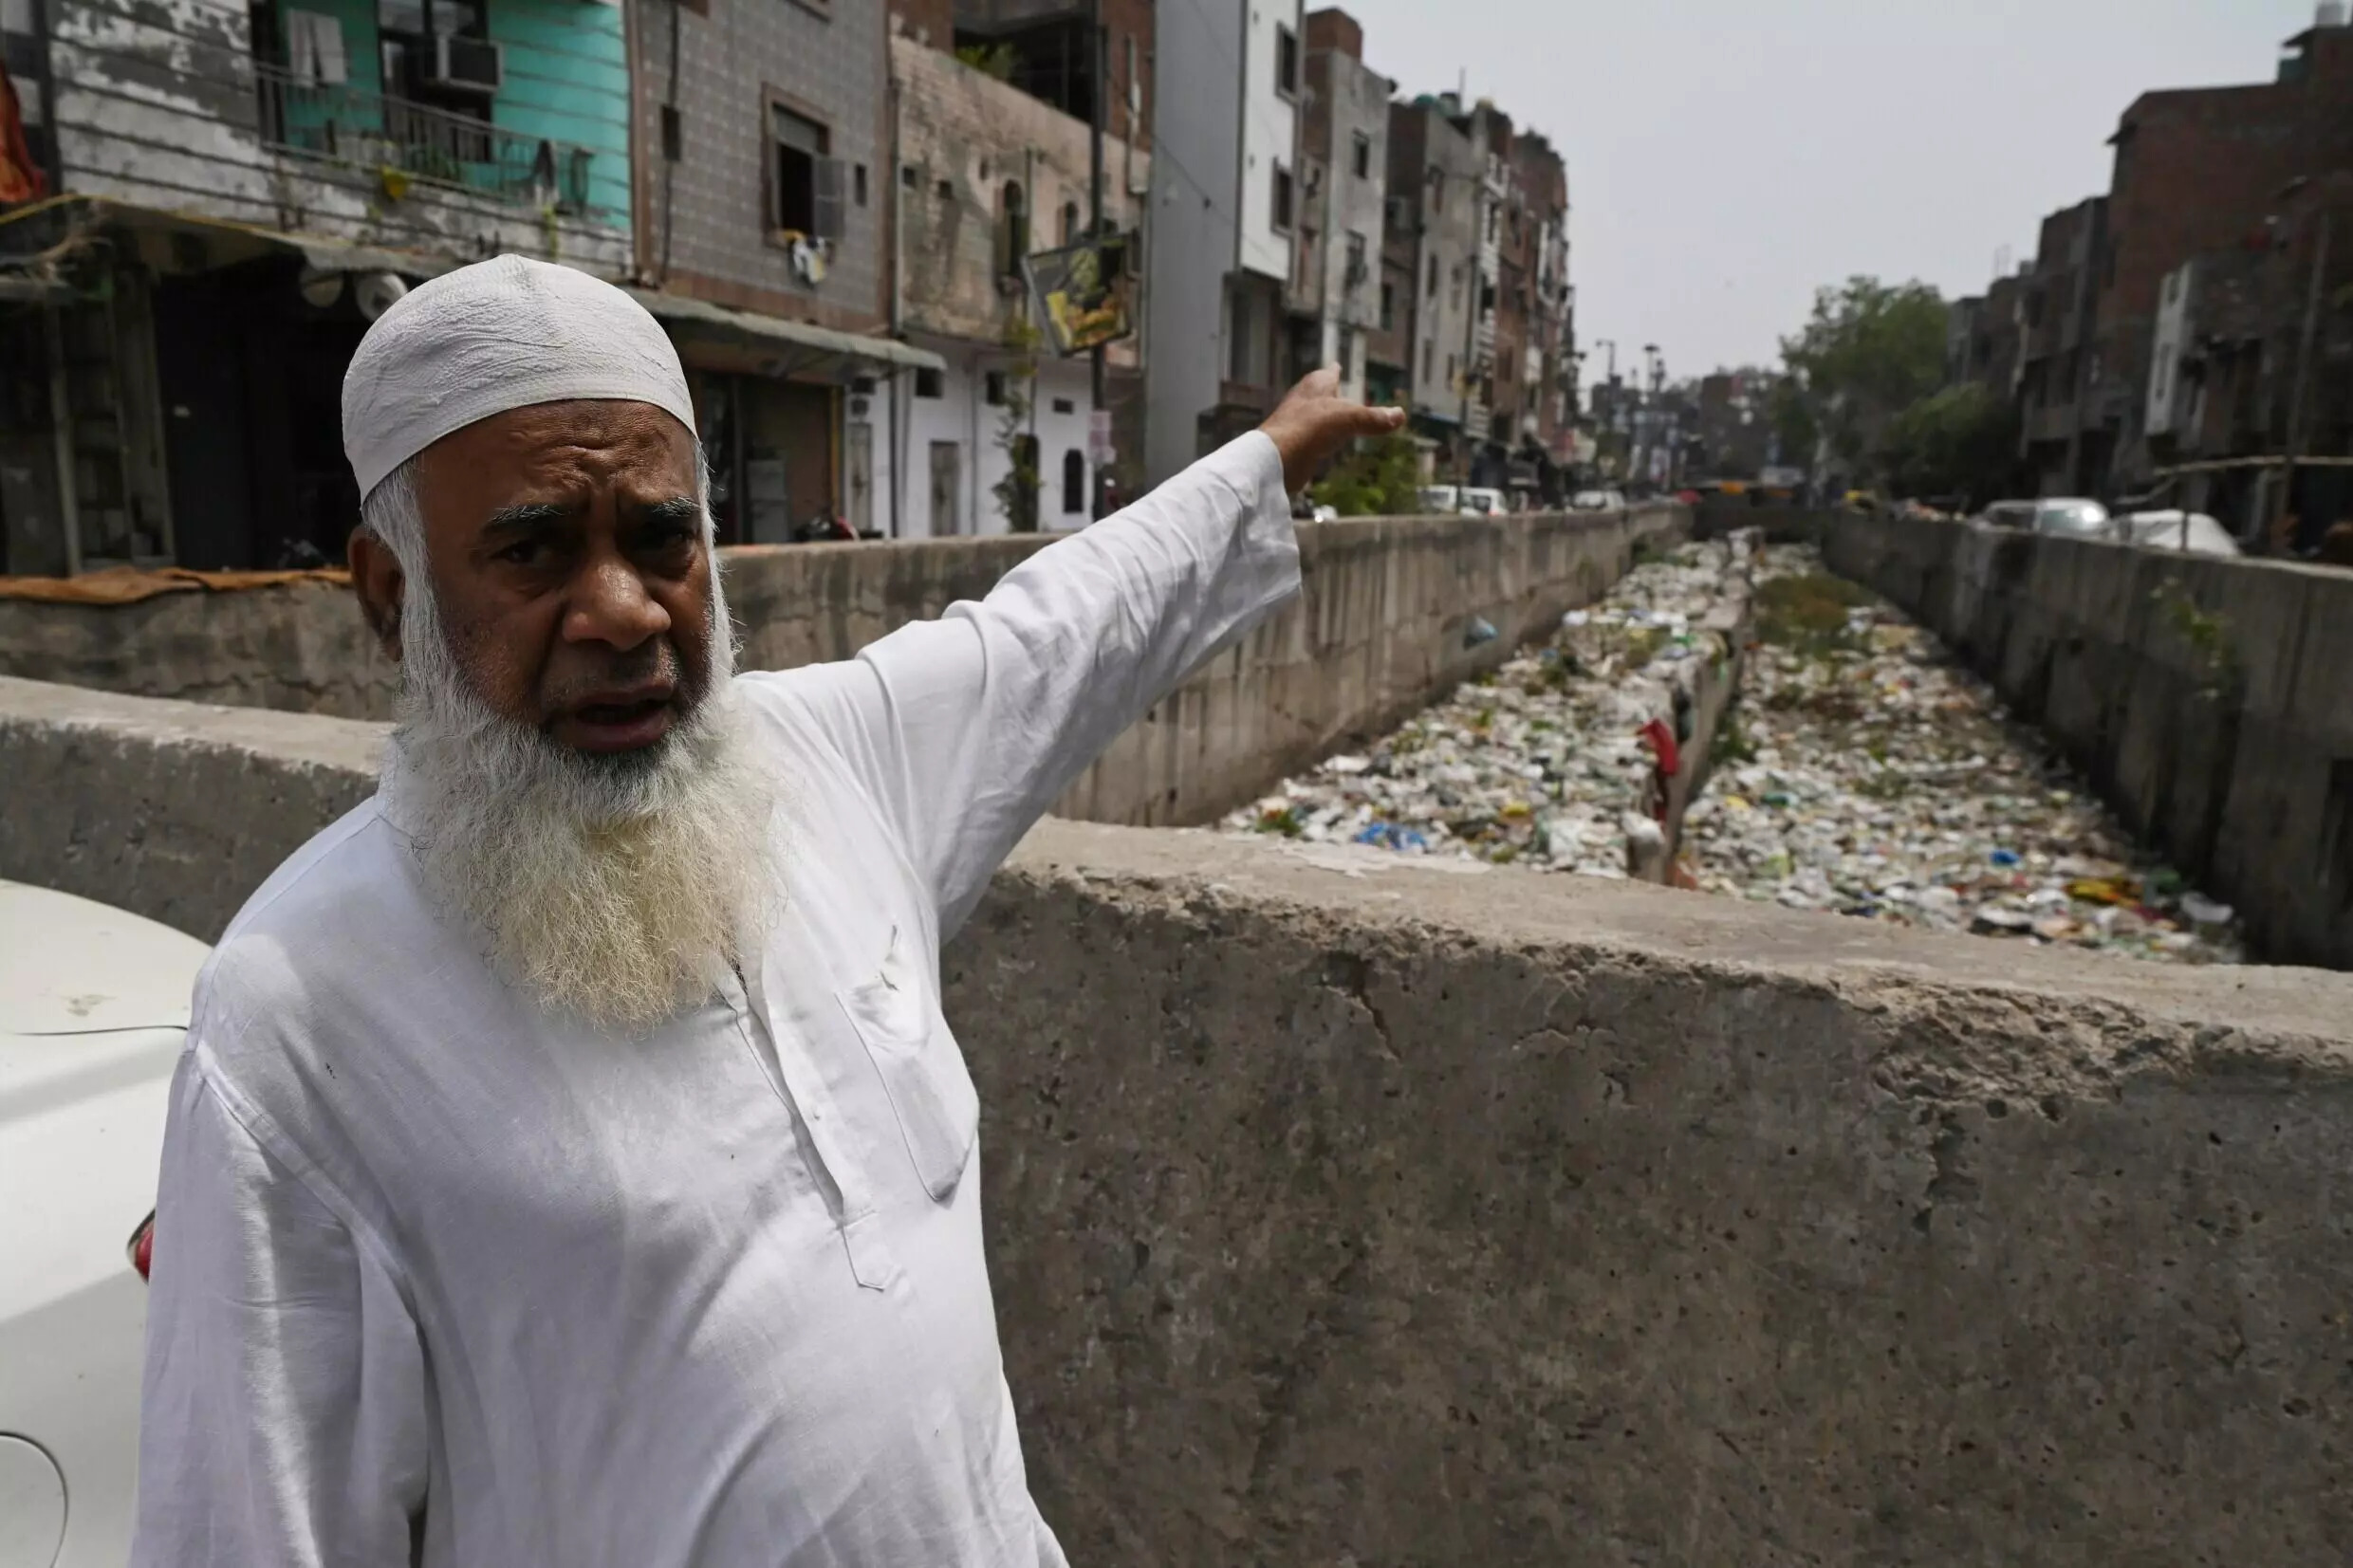 Khalil Ahmad, a resident of New Delhi's Seelampur neighbourhood, gestures towards a sewage canal filled with garbage during a interview with AFP. Photo: AFP